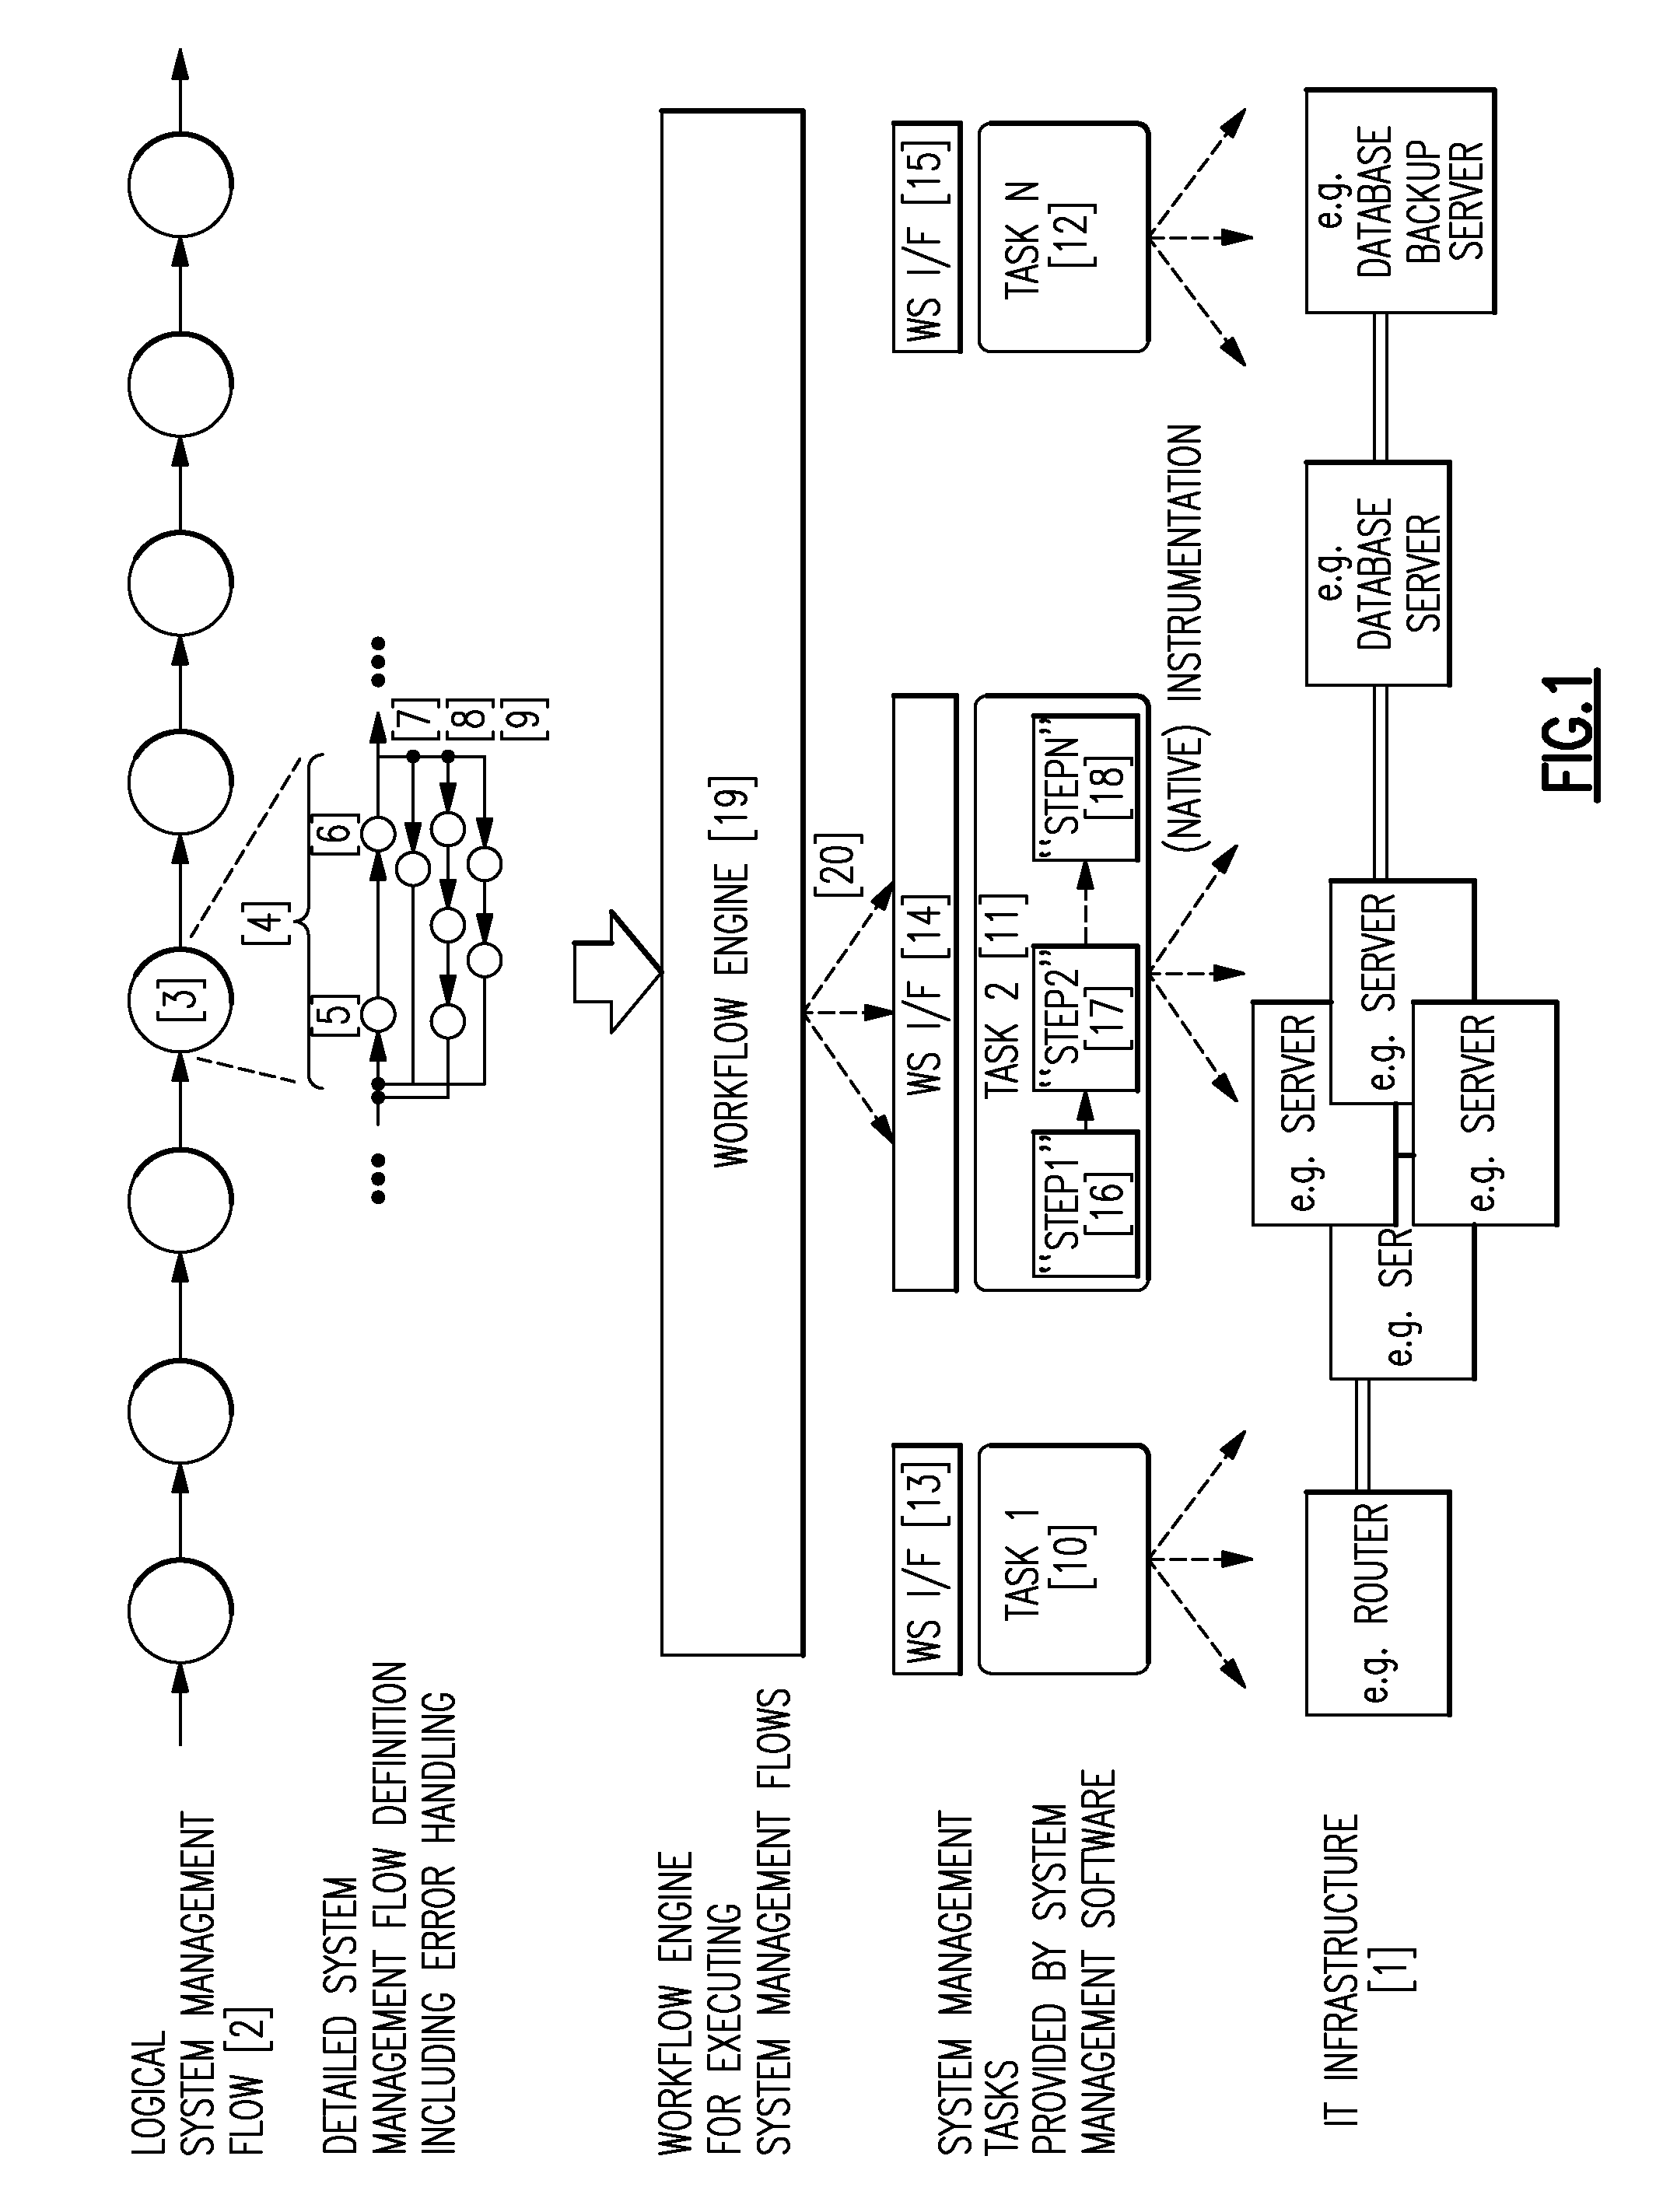 Method and System for Automated Handling of Errors in Execution of System Management Flows Consisting of System Management Tasks